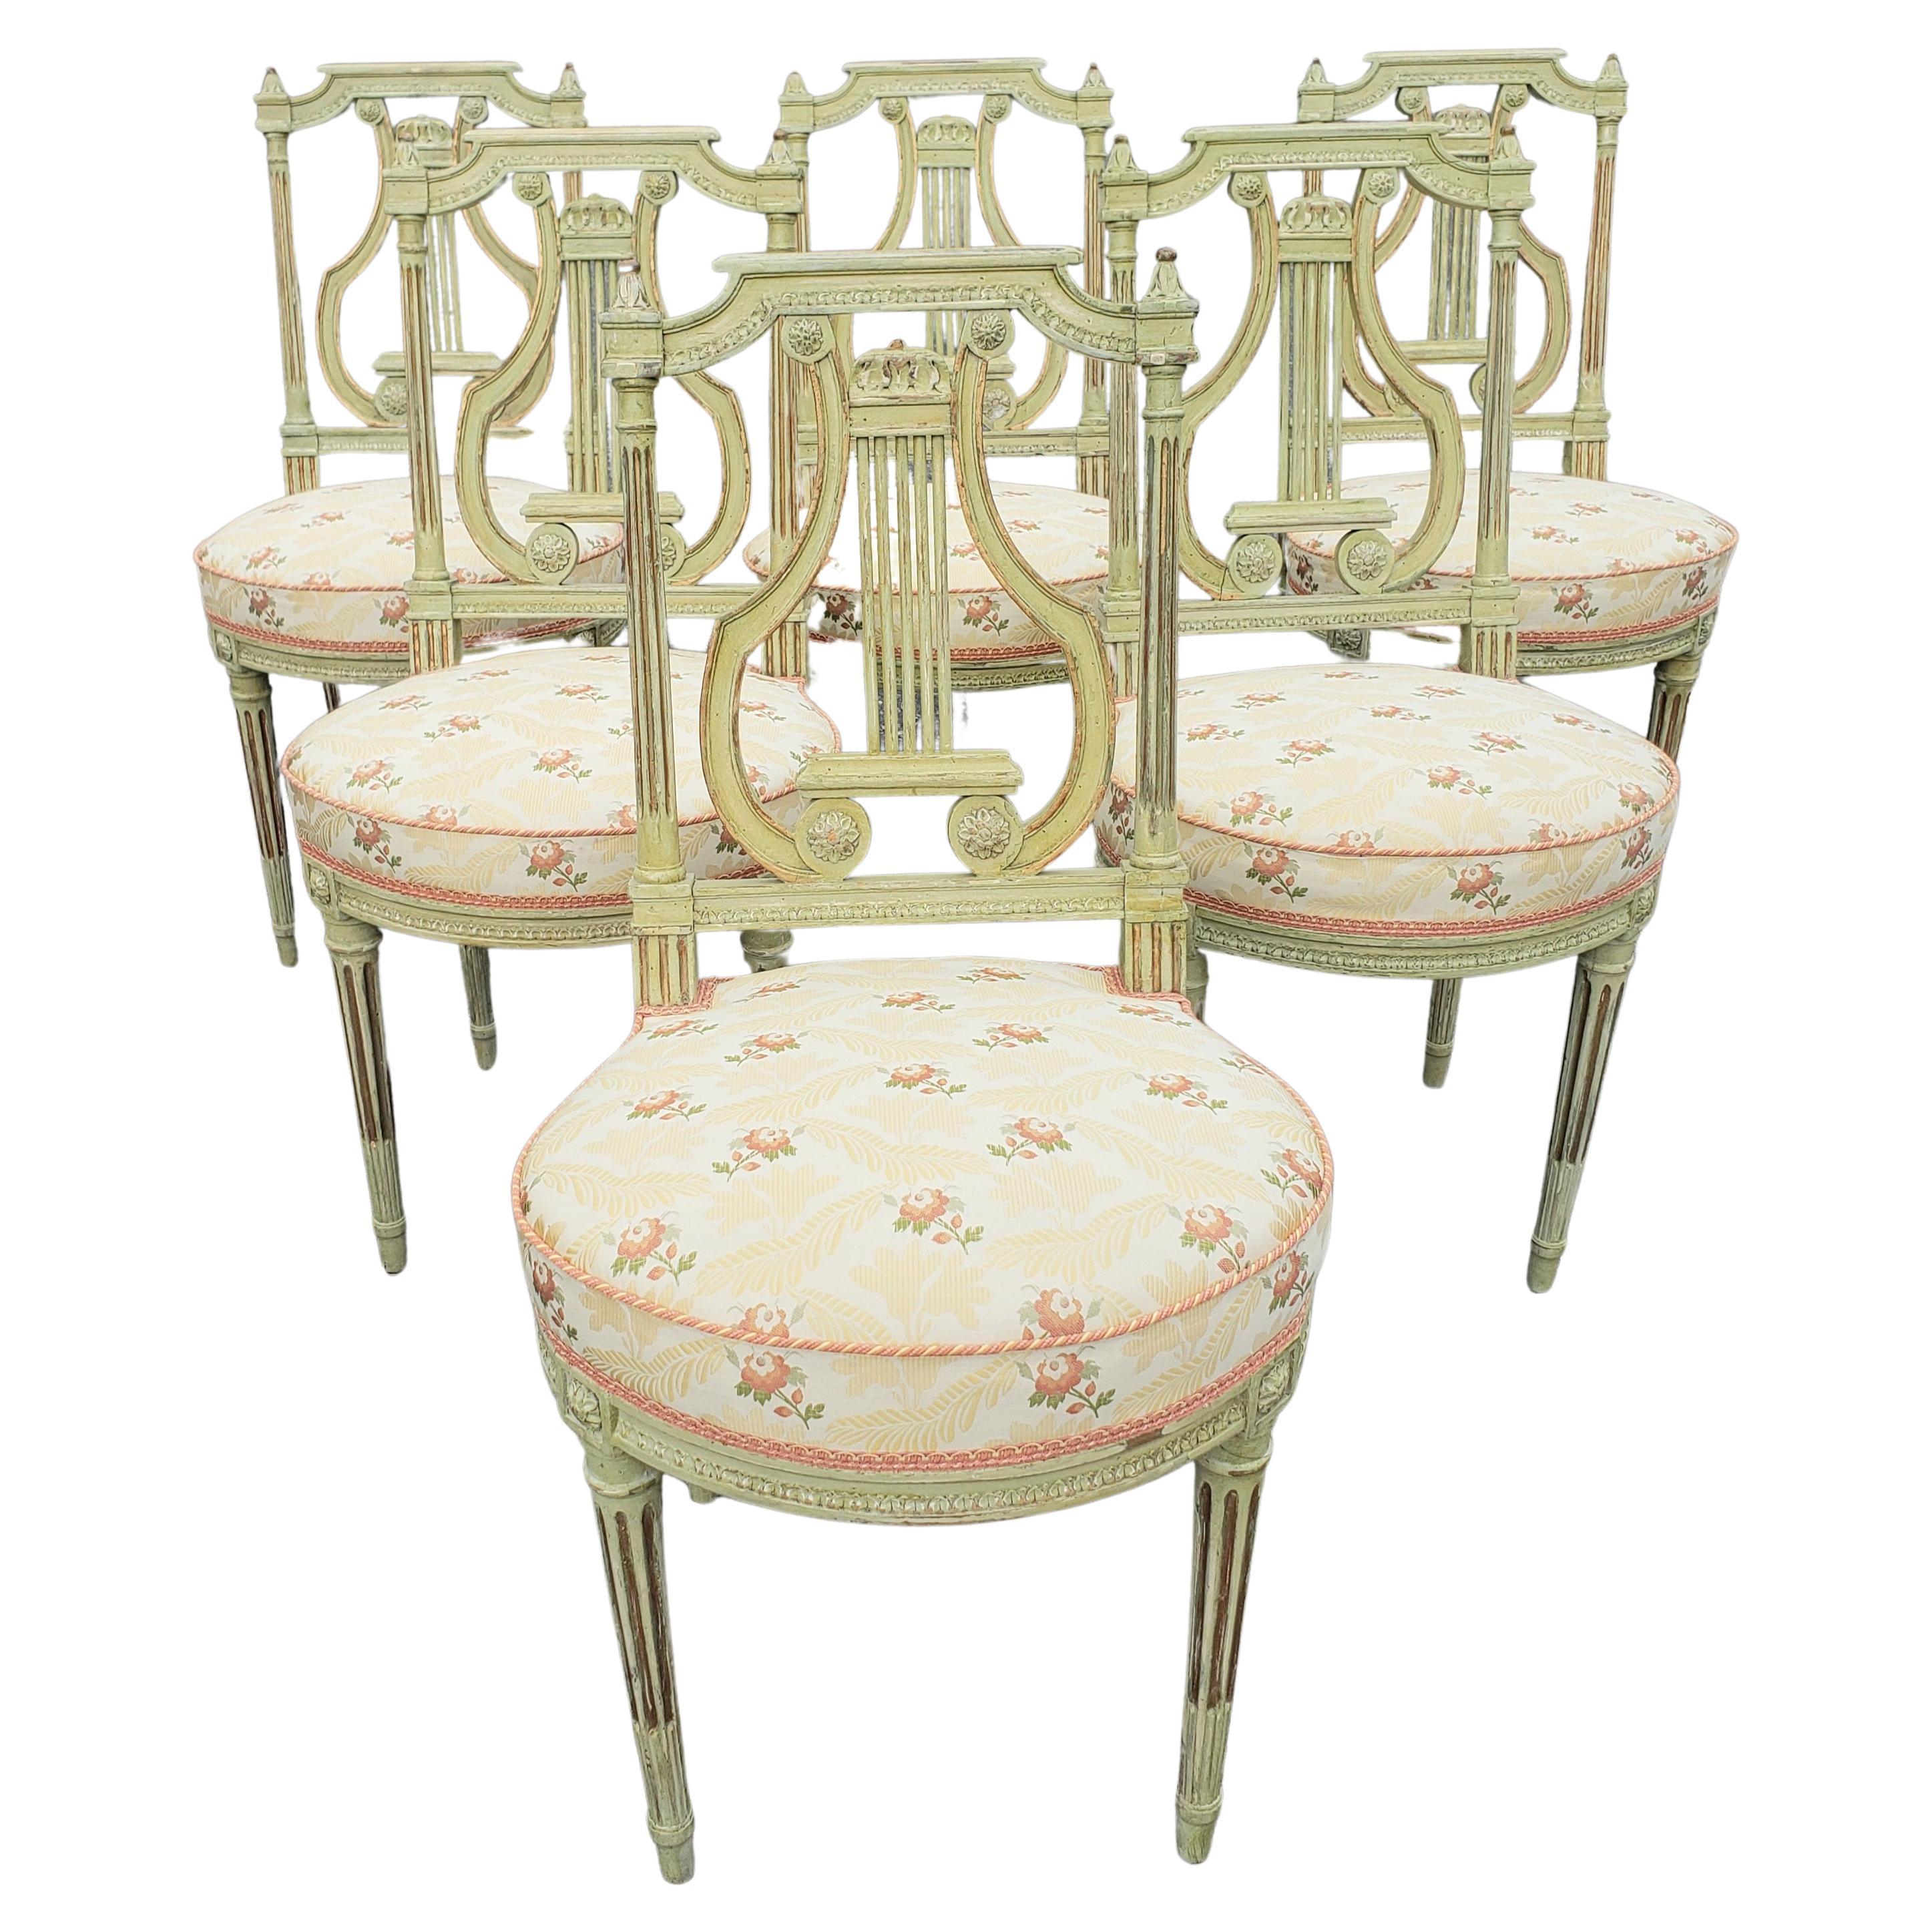 An exquisite, incredible Set Of Six Louis XVI Style Green Parcel Gilt Painted Dining Chairs in great antique condition. Seats are very firm and upholstery in great condition. Chair are heavy, solidly built with giggles of any kind.
Measures 17